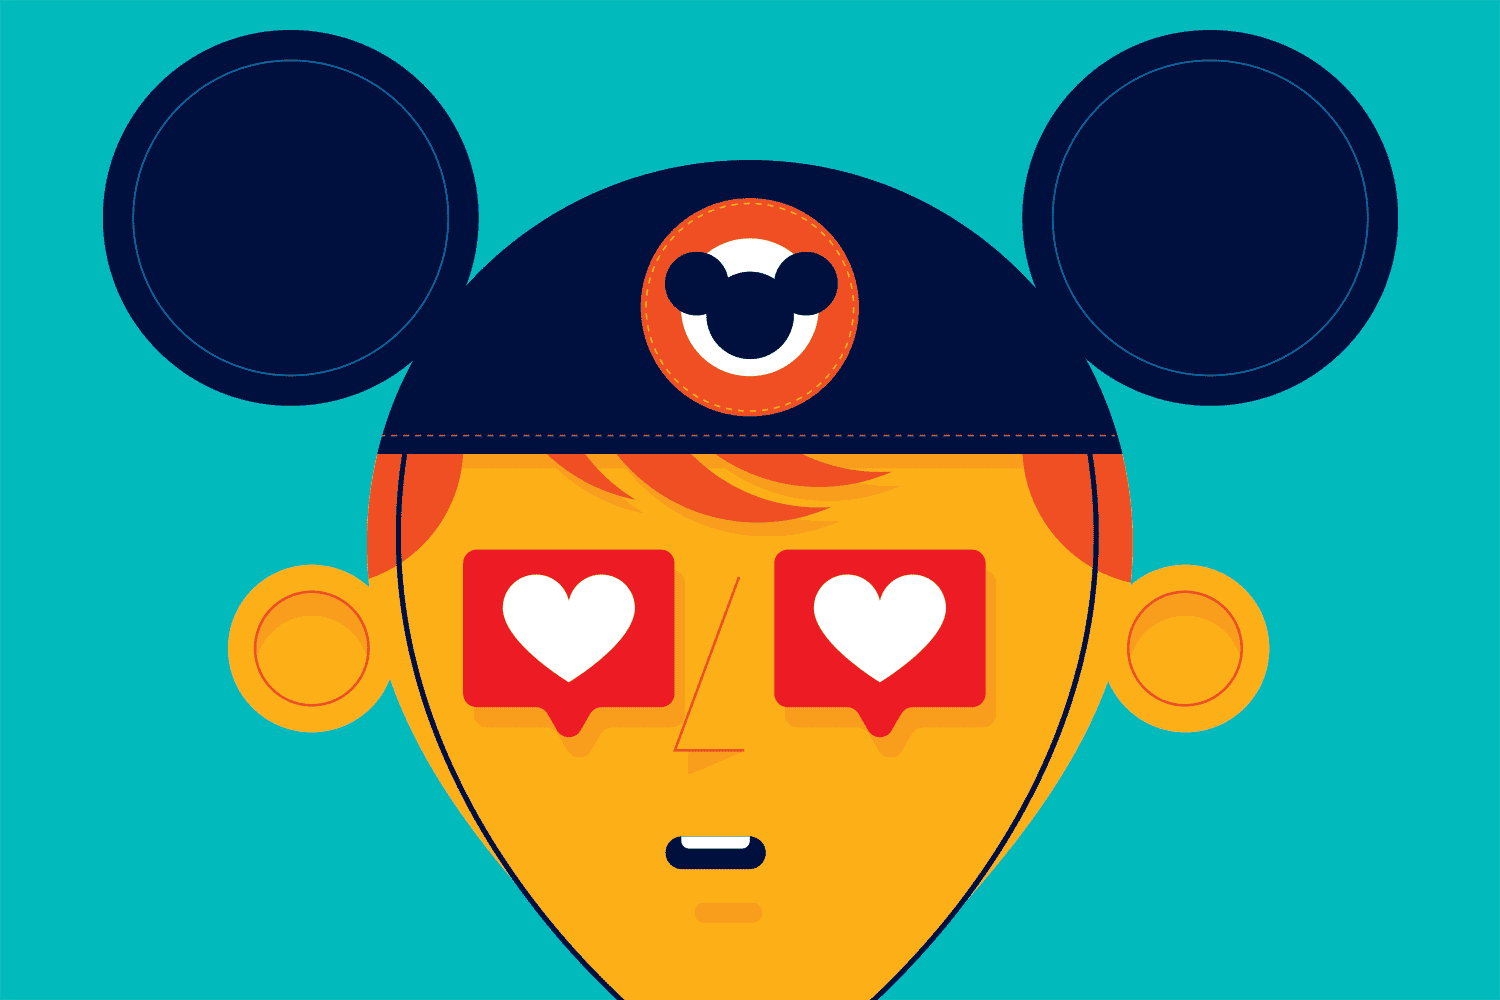 An illustration of a person wearing a hat of mouse ears.